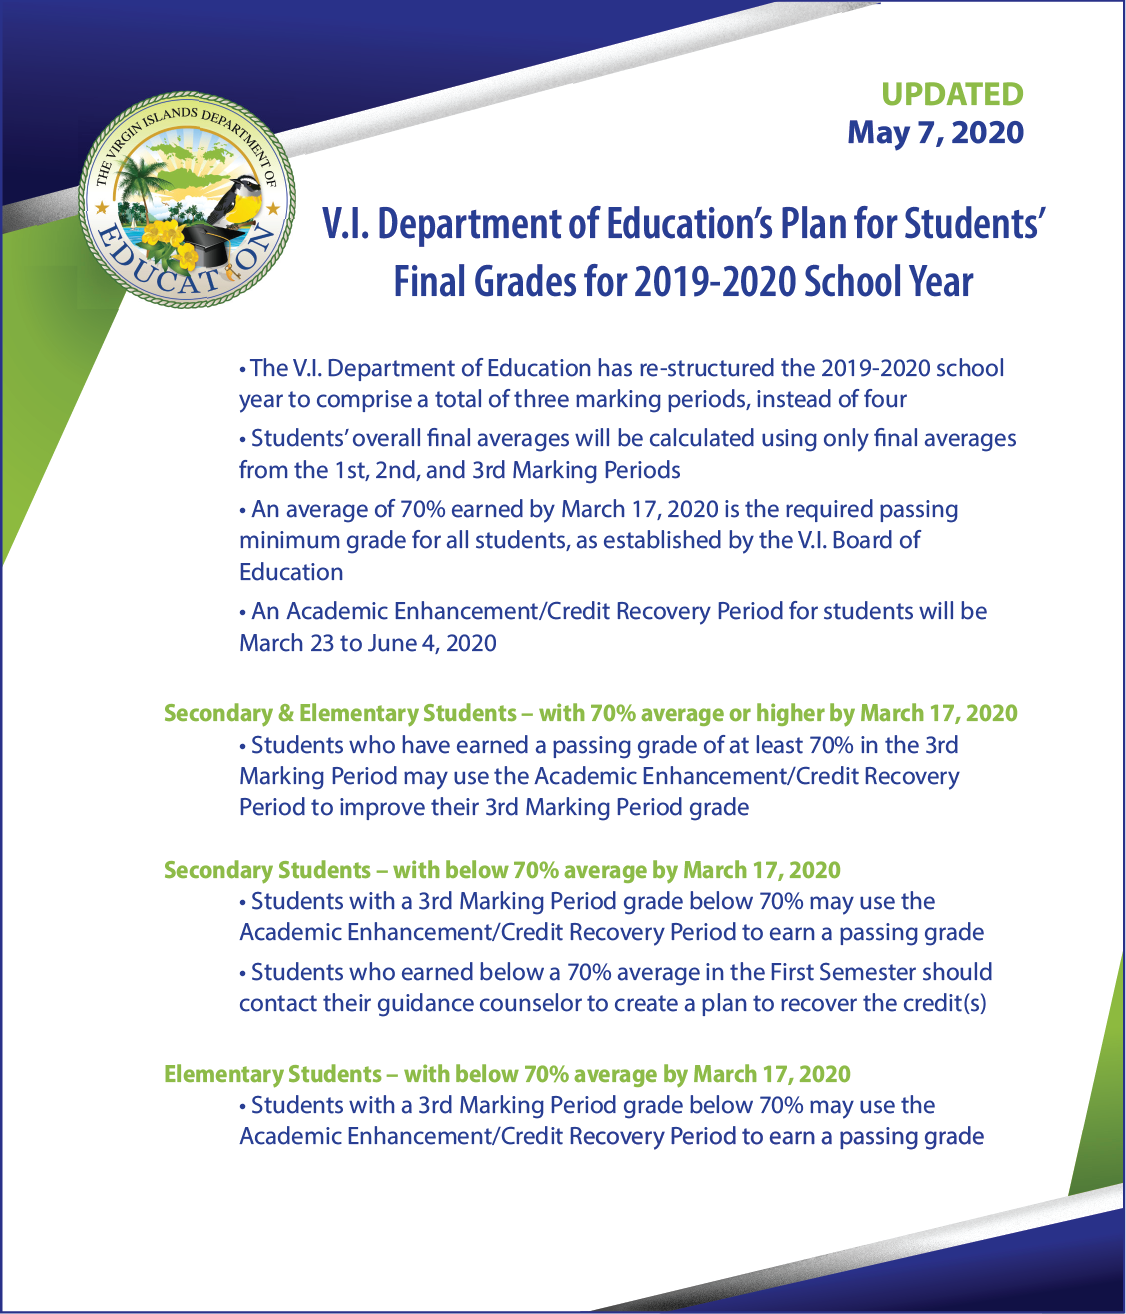 UPDATED VIDE Plan for Final Grades for 2019-2020 SY-01.png